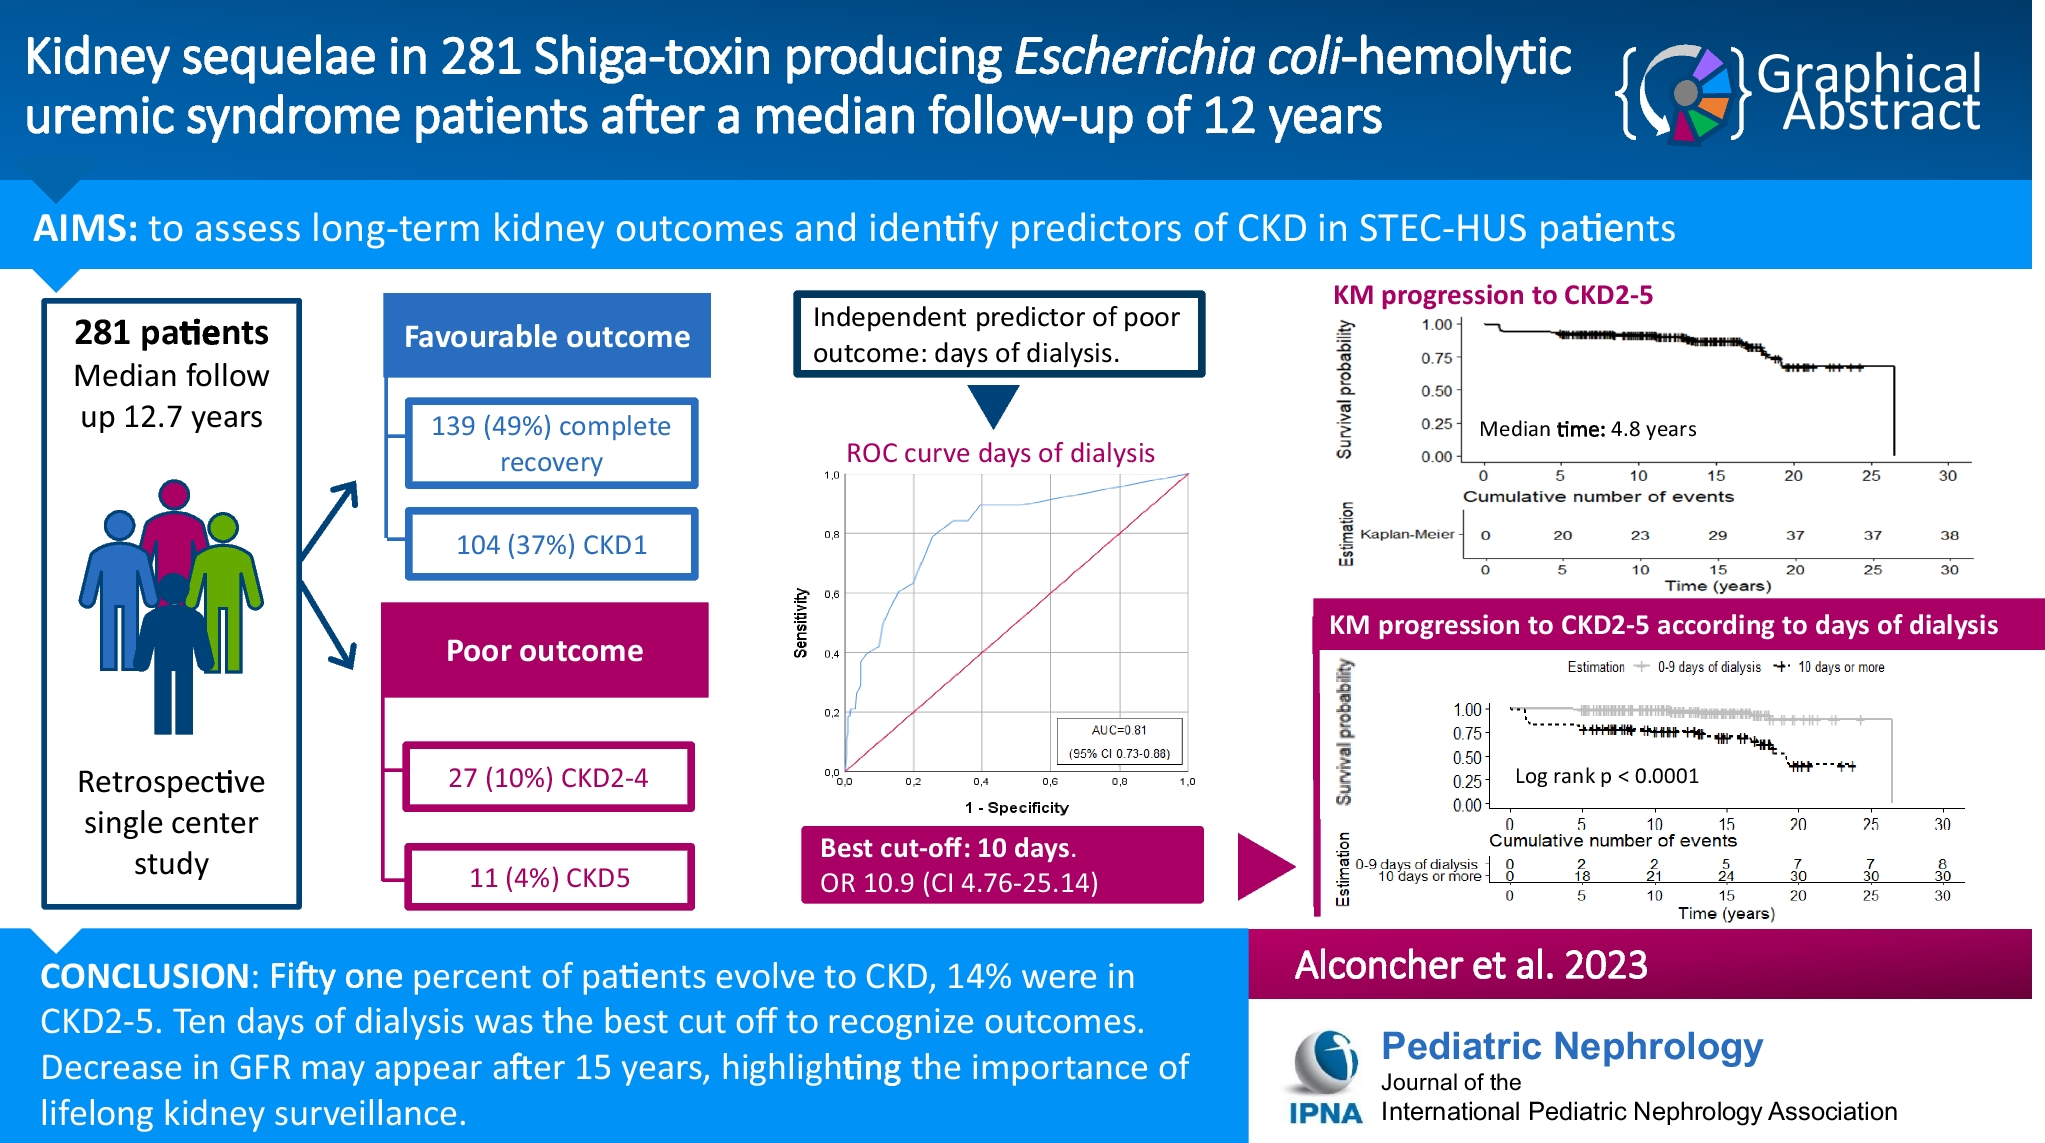 Kidney sequelae in 281 Shiga toxin–producing Escherichia coli-hemolytic uremic syndrome patients after a median follow-up of 12 years